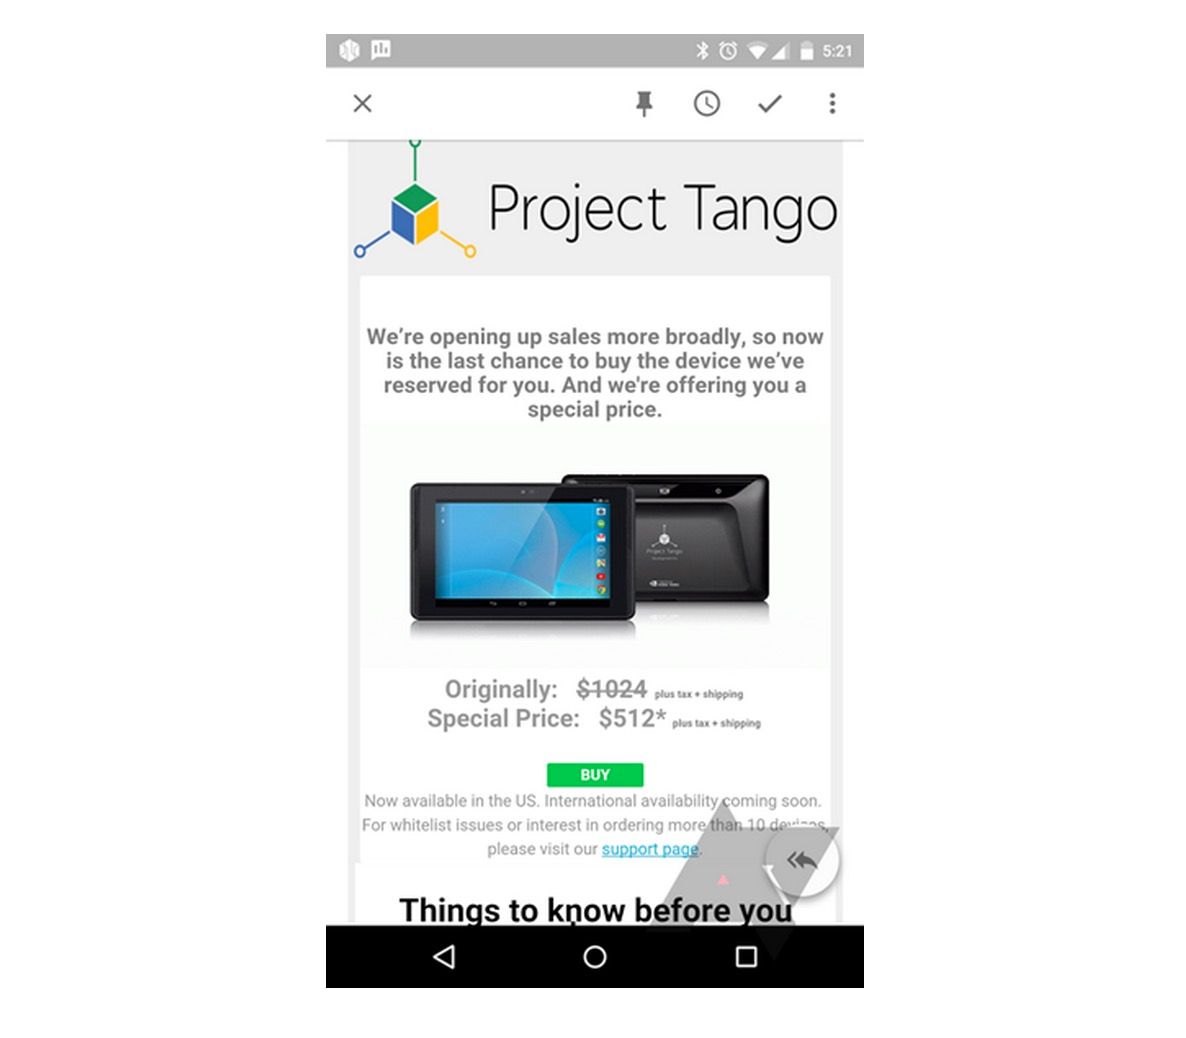 google cuts price of project tango tablet in half but keeps it developer only image 2